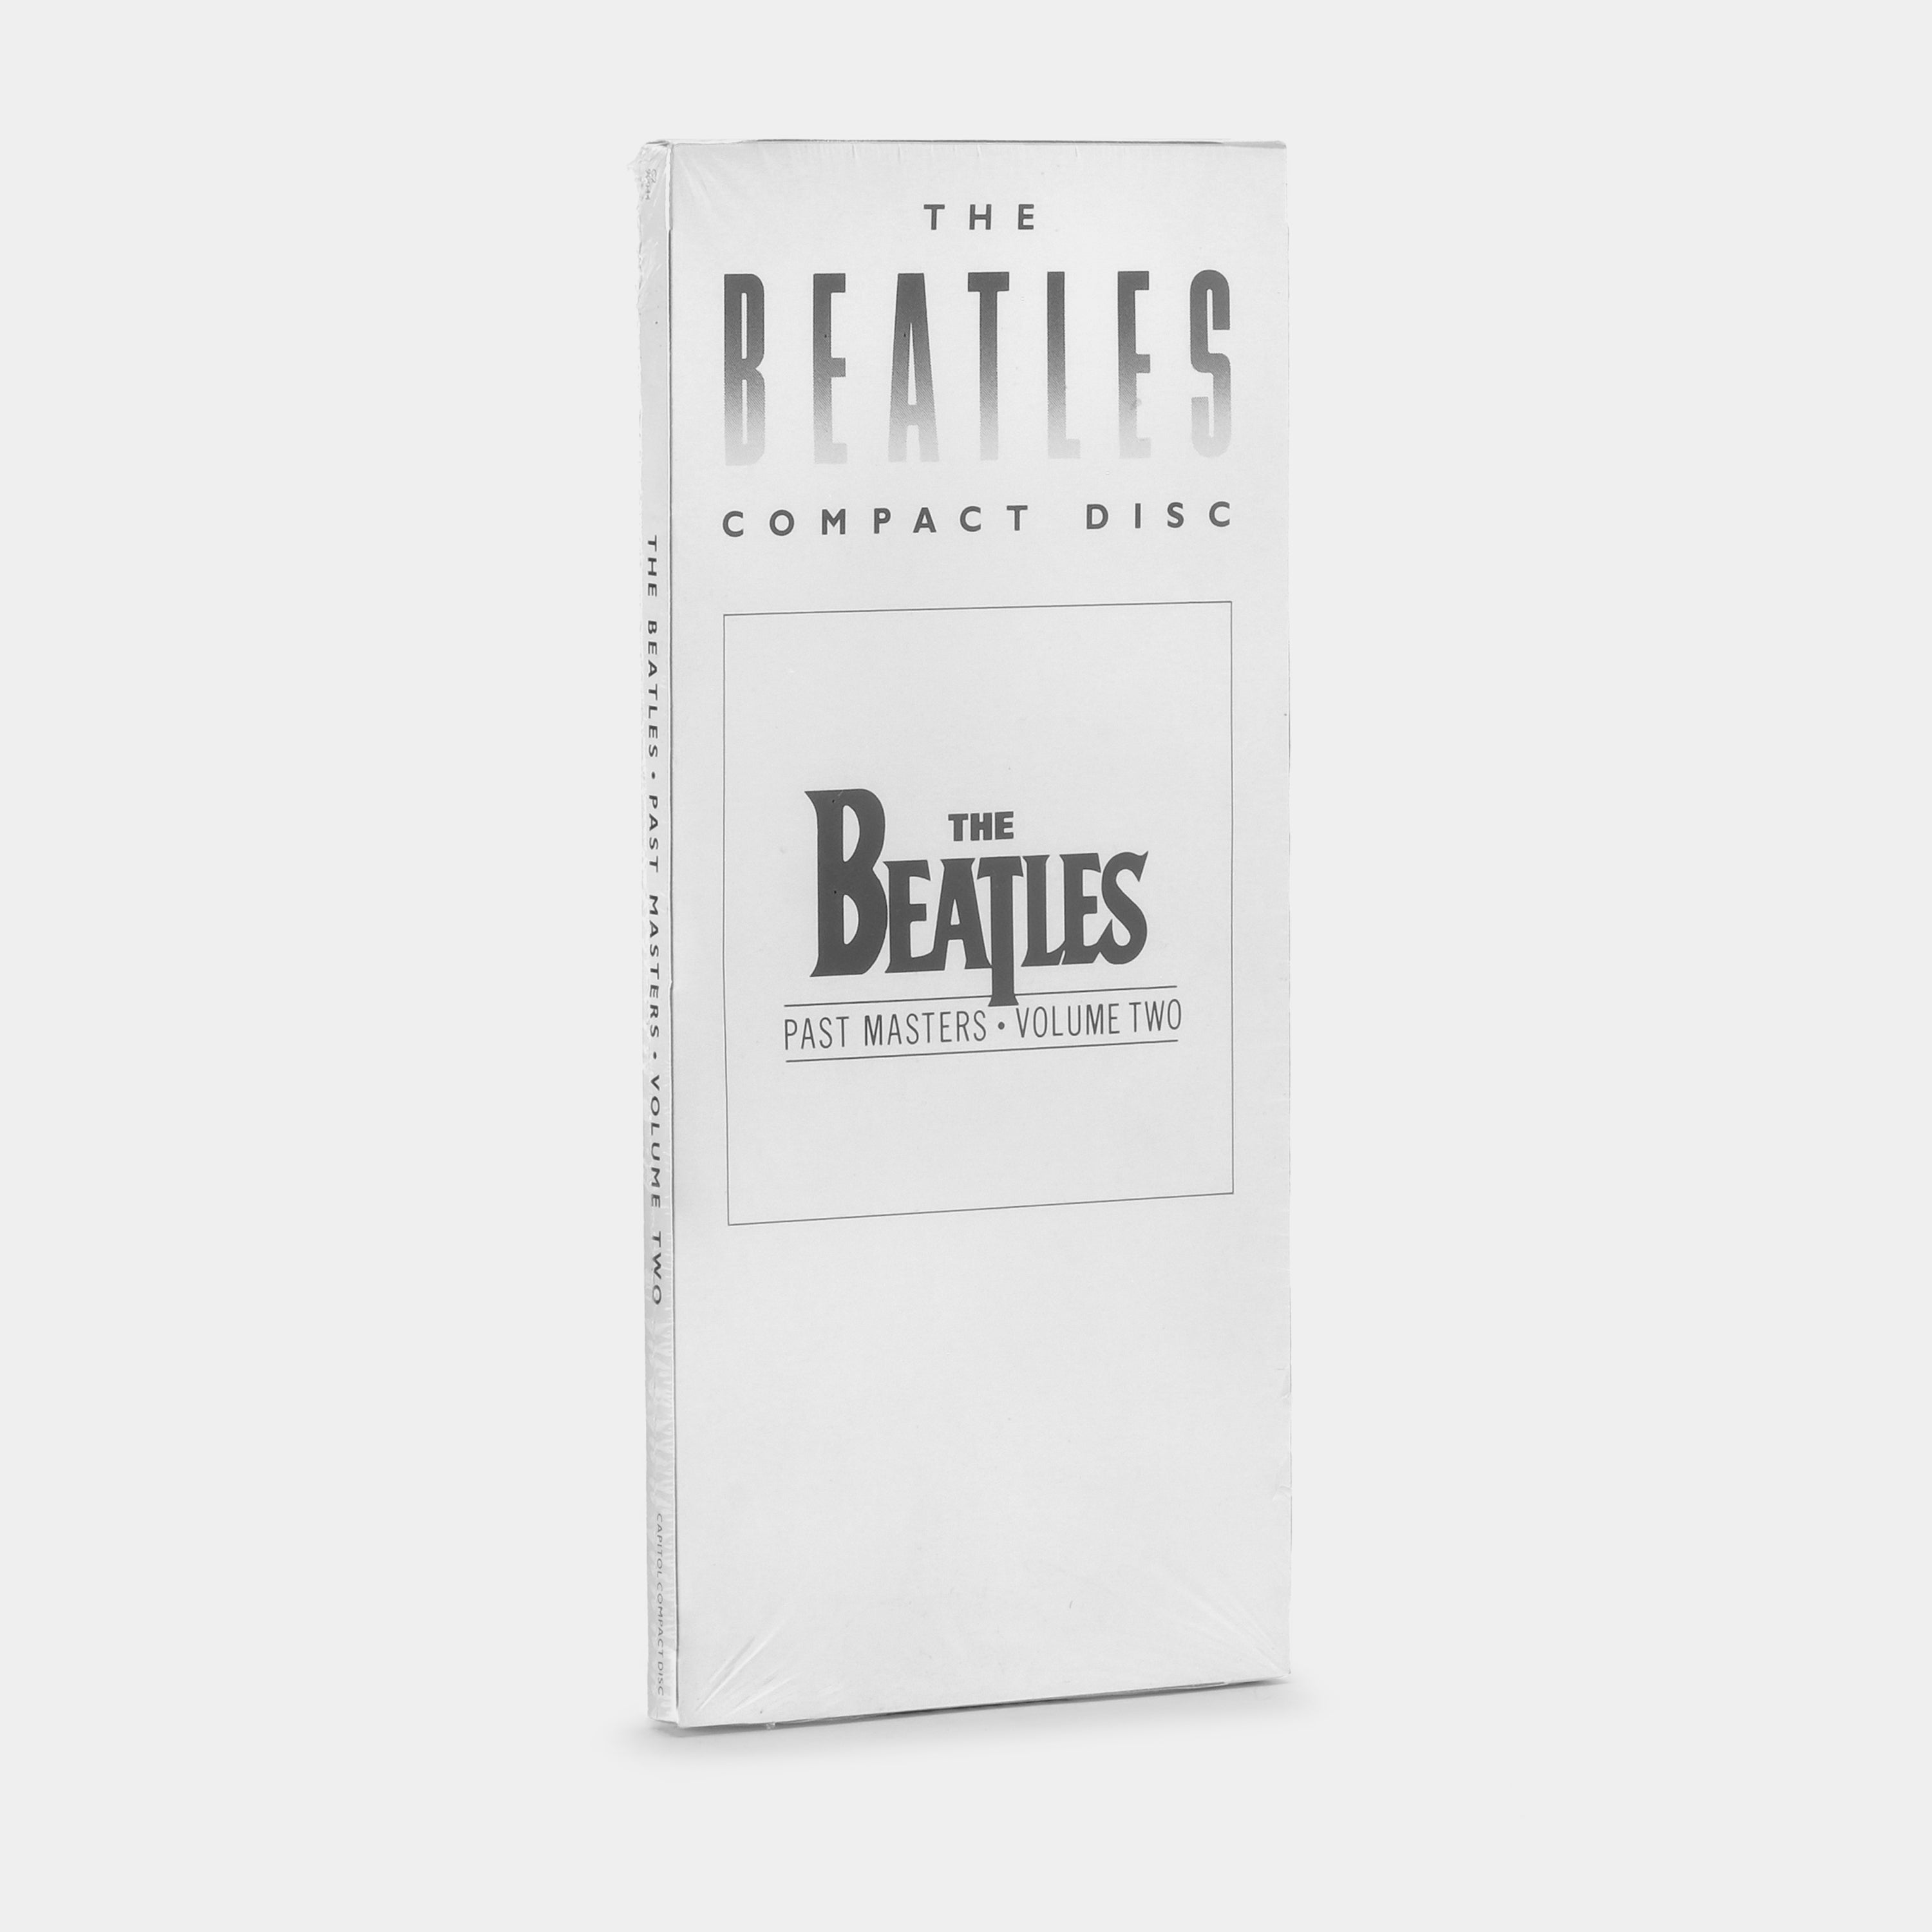 The Beatles - Past Masters: Volume Two CD (Sealed)